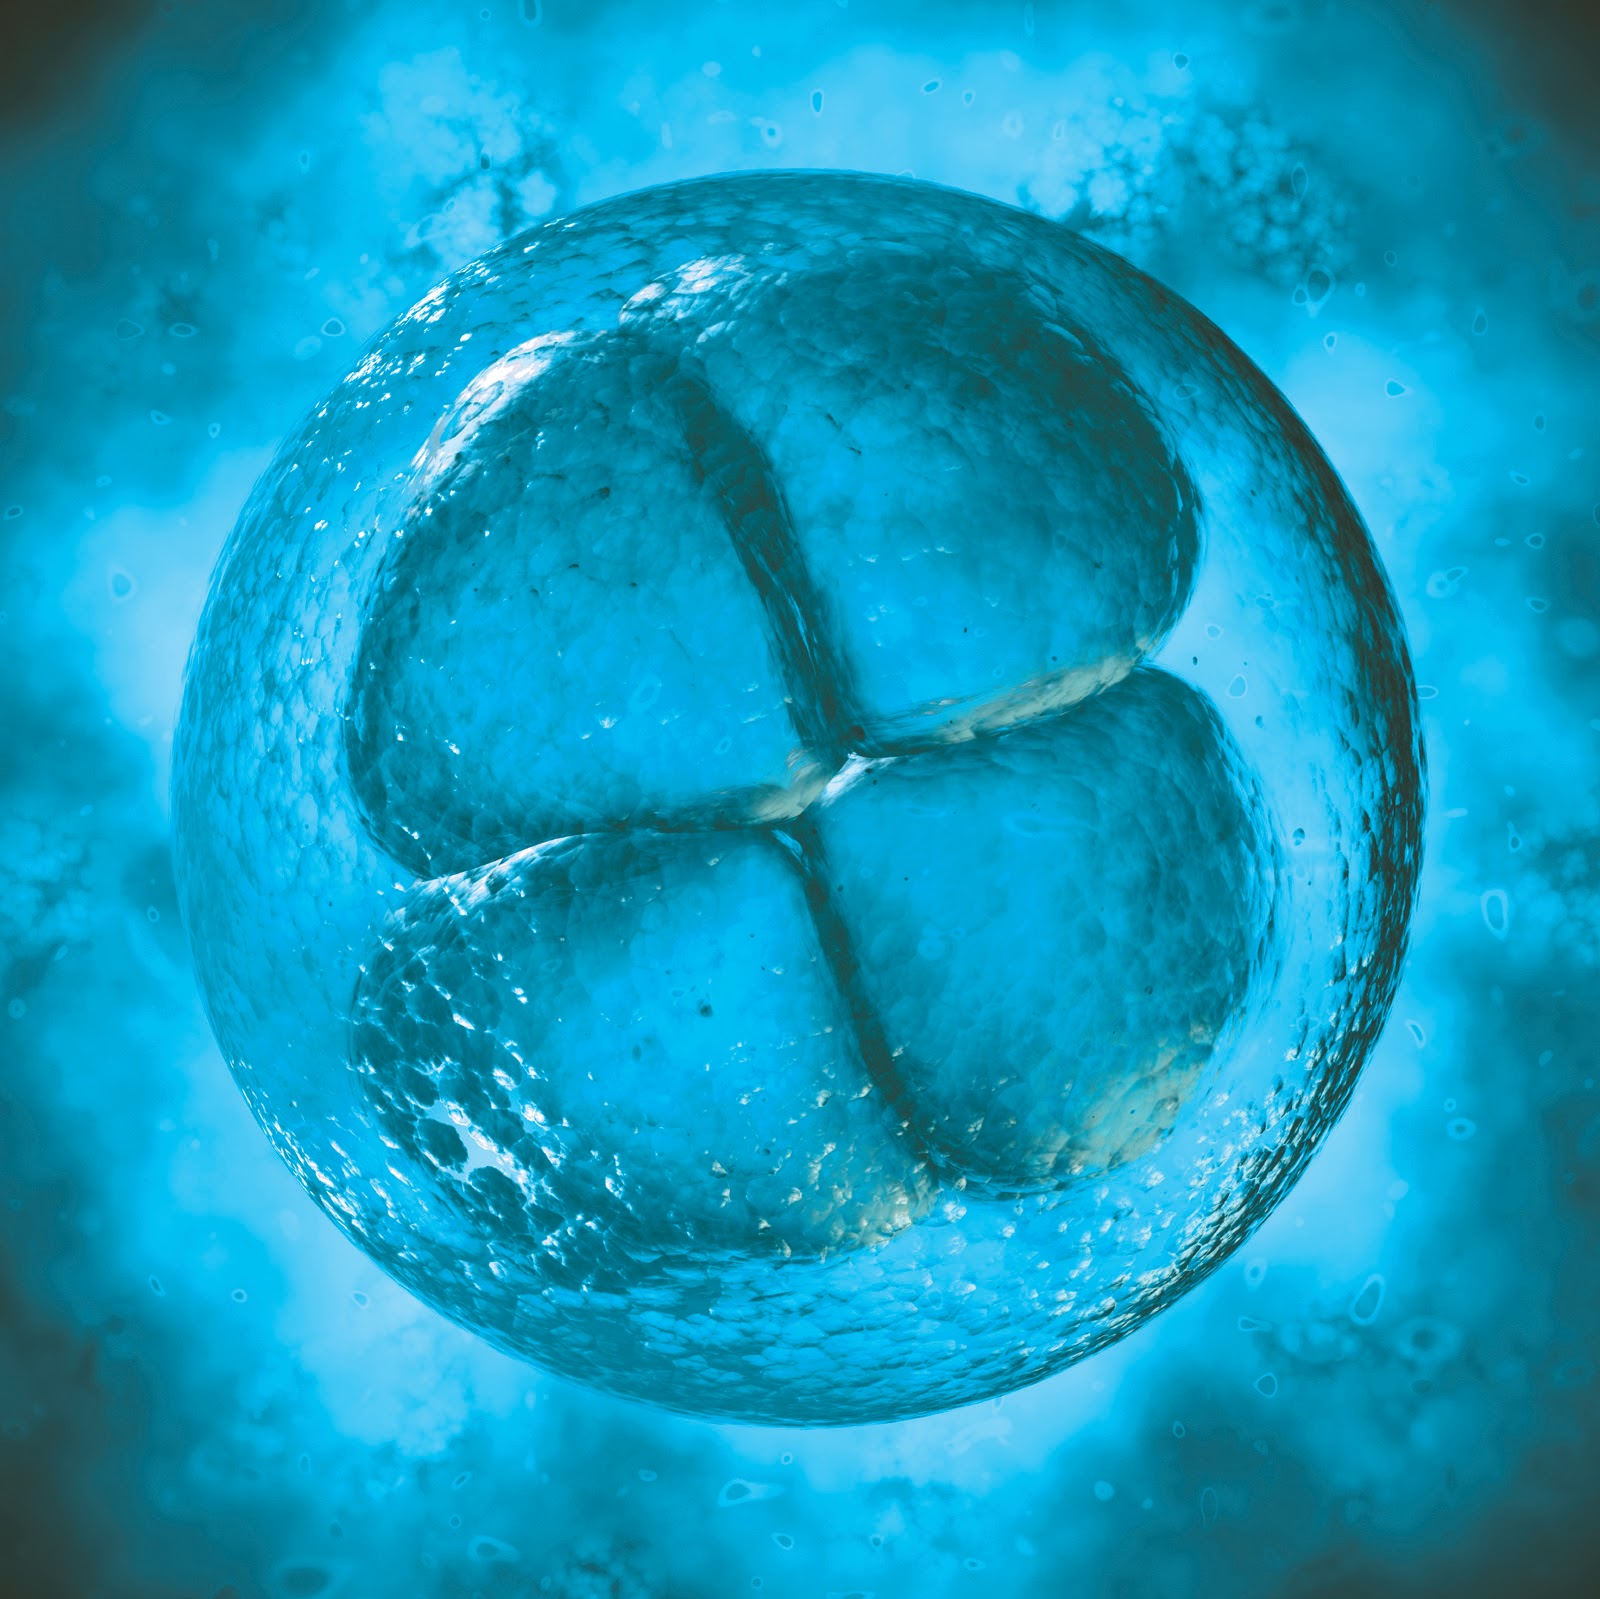 Closeup picture of an embryo